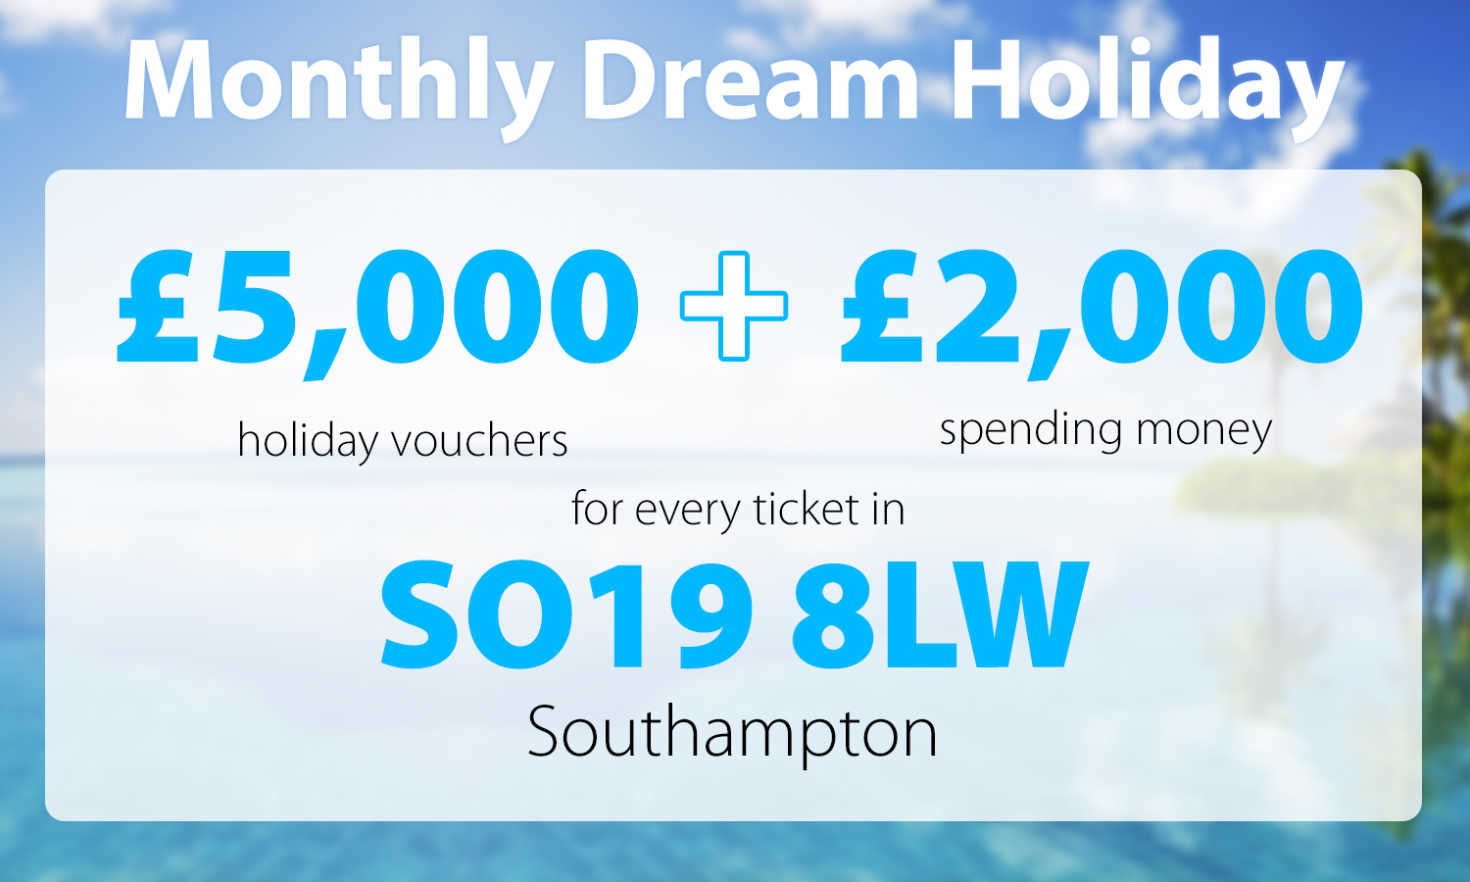 Two lucky Southampton players will be jetting off to the sun after winning this month's Dream Holiday prize